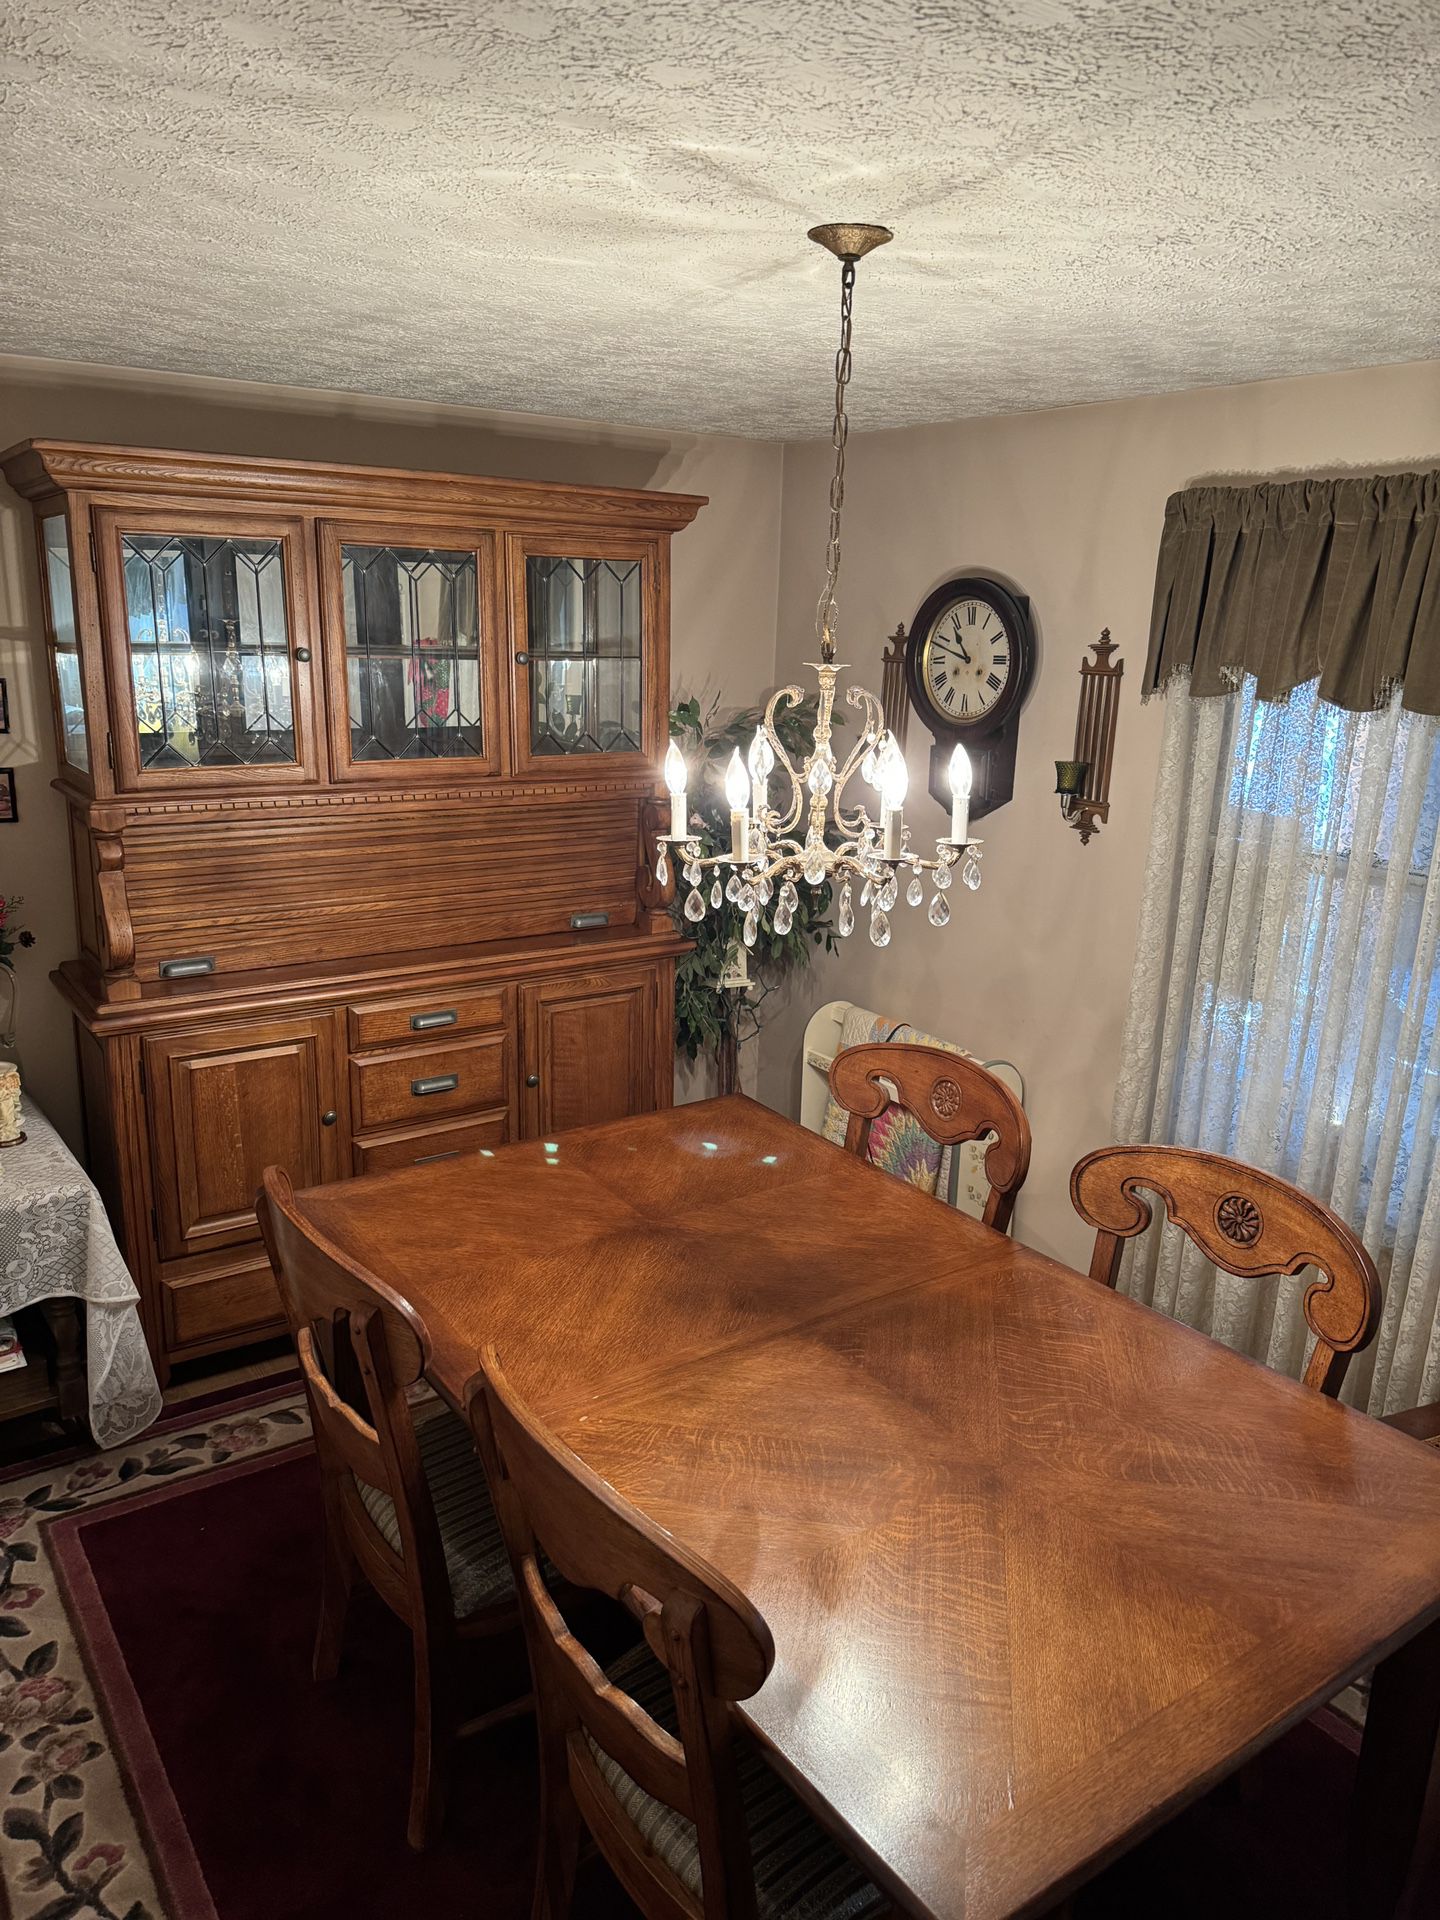 6-Piece Solid Wood Dining Room Set. 6’ Dining Table with 3’ Leaf to extend to 9’, 4 Chairs, & 7x5’ Hutch! Bought at Ashley and in excellent shape!  Cu